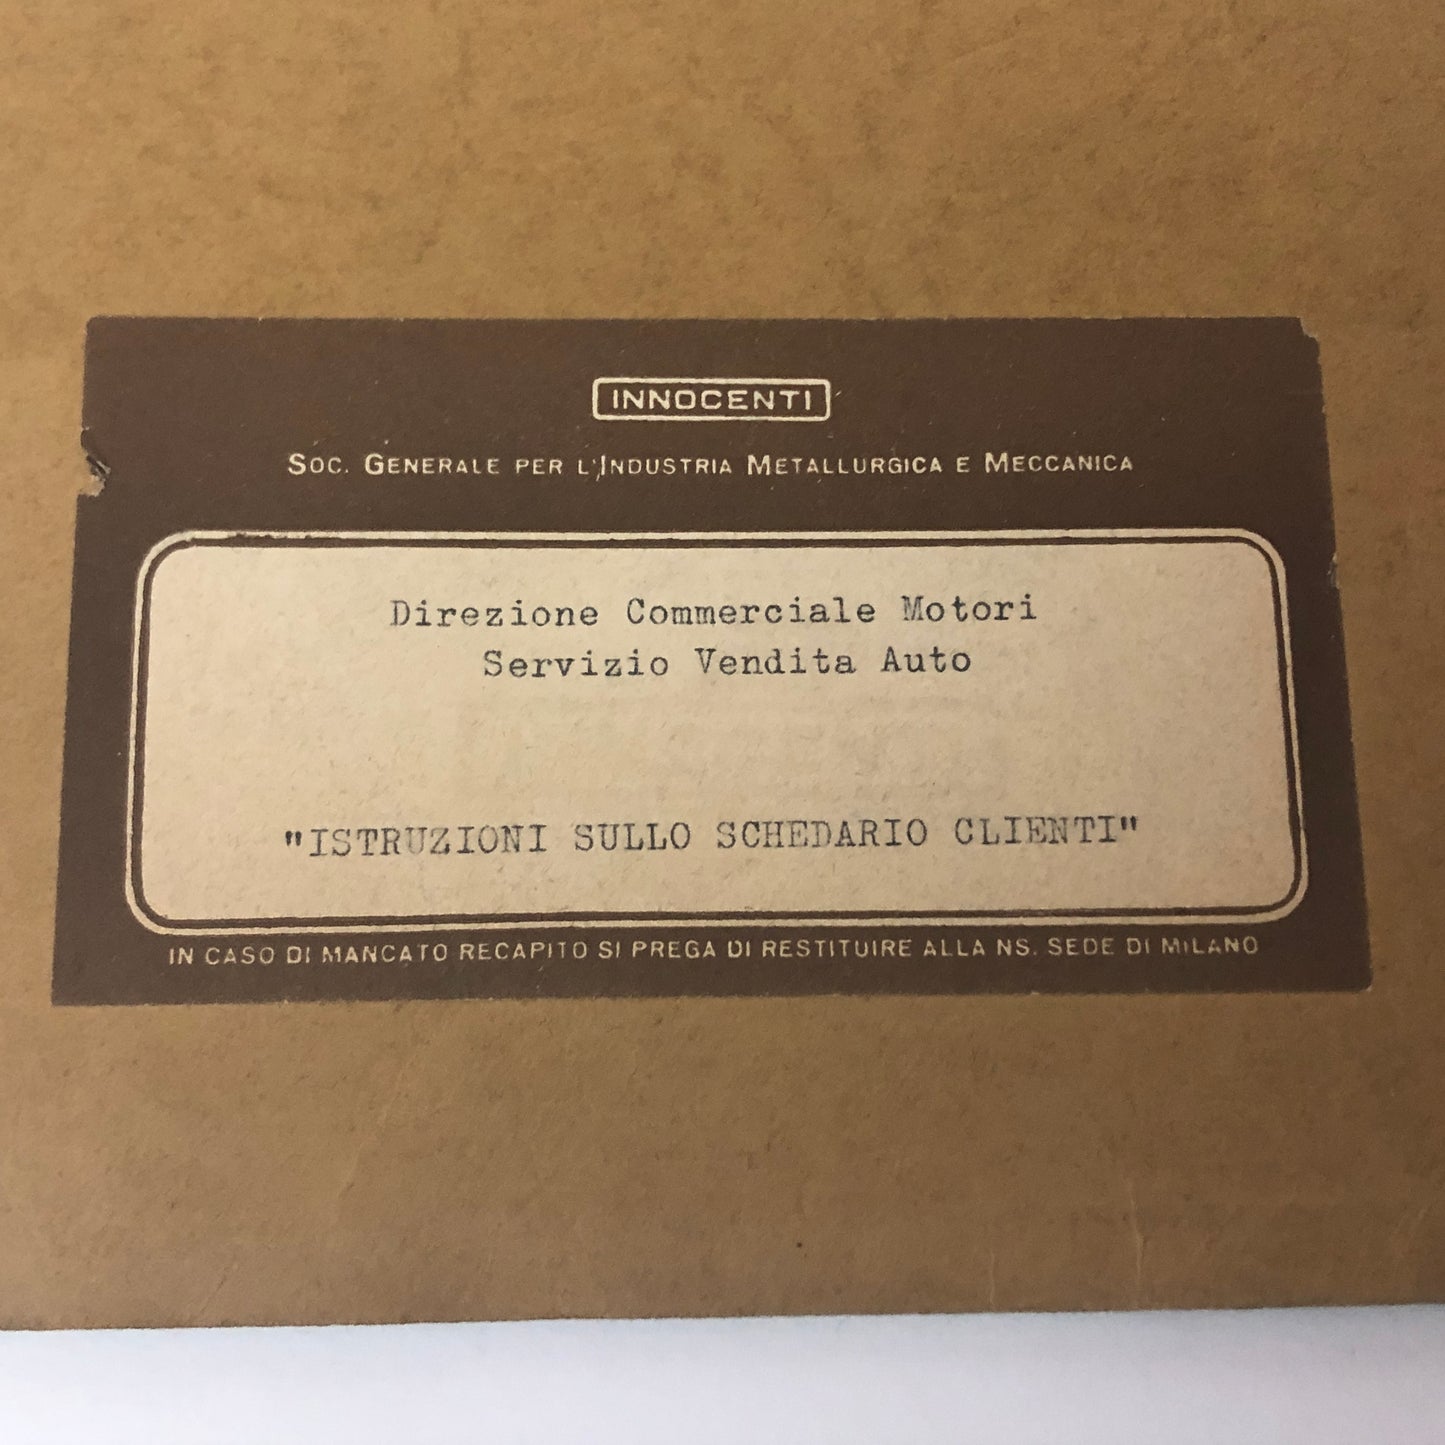 Innocenti, Instructions on the Correct Compilation of the Customer File Reserved for Innocenti Commission Agents.